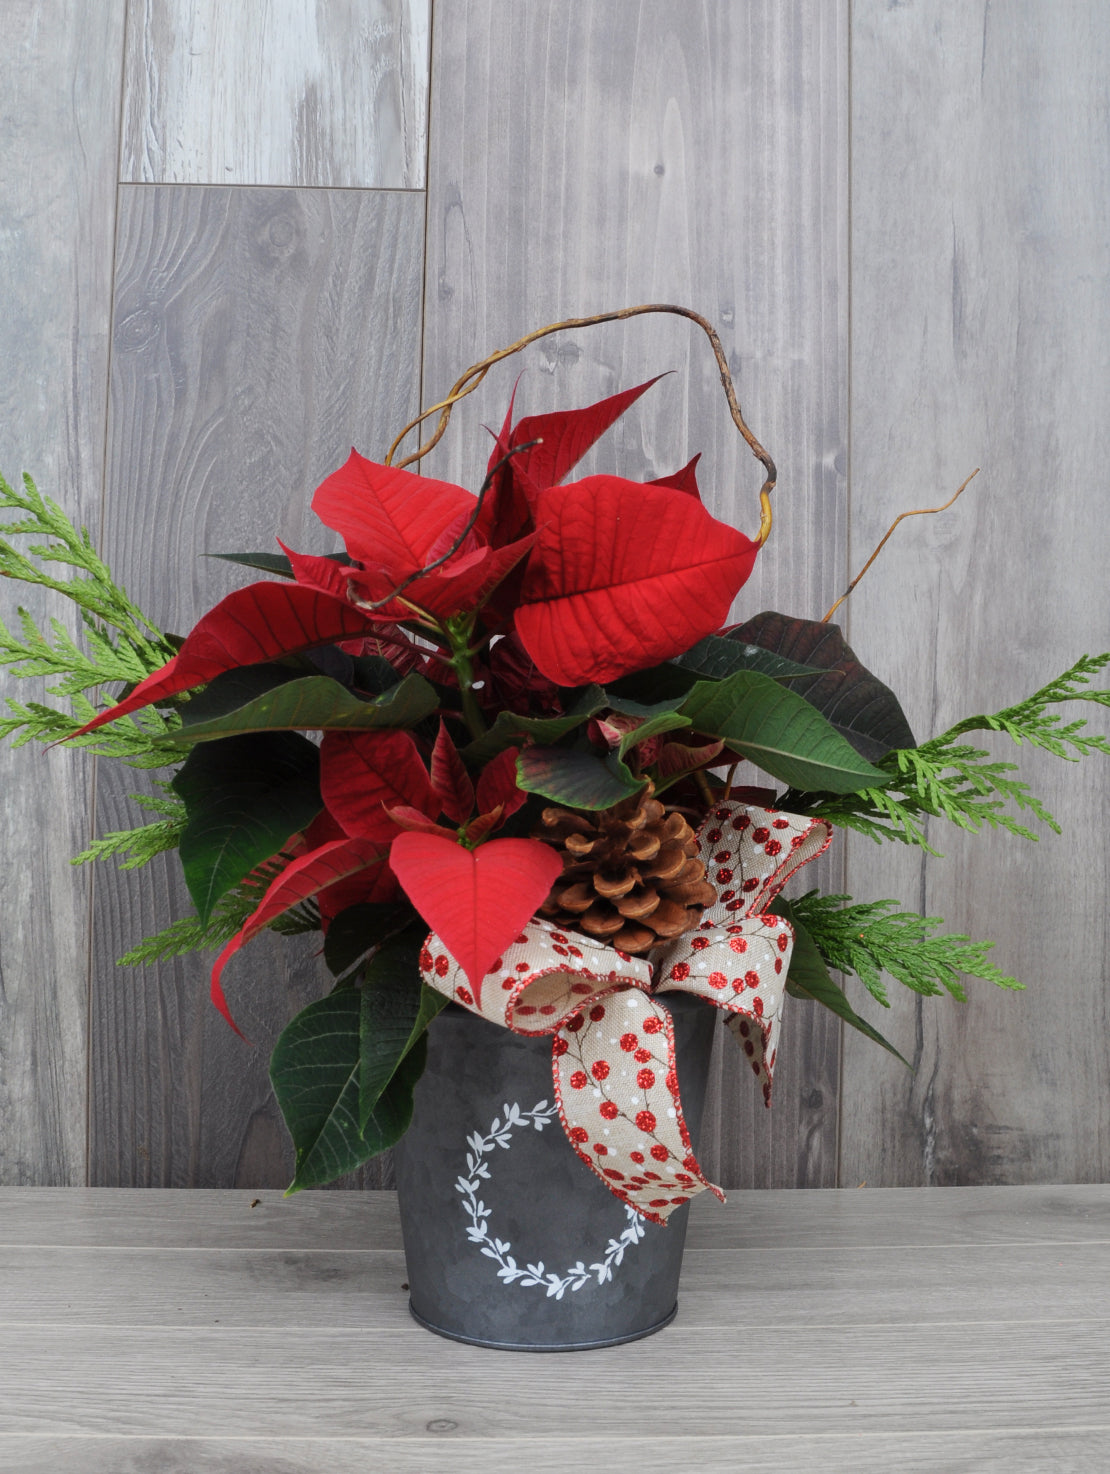 Poinsettia to be delivered as a gift